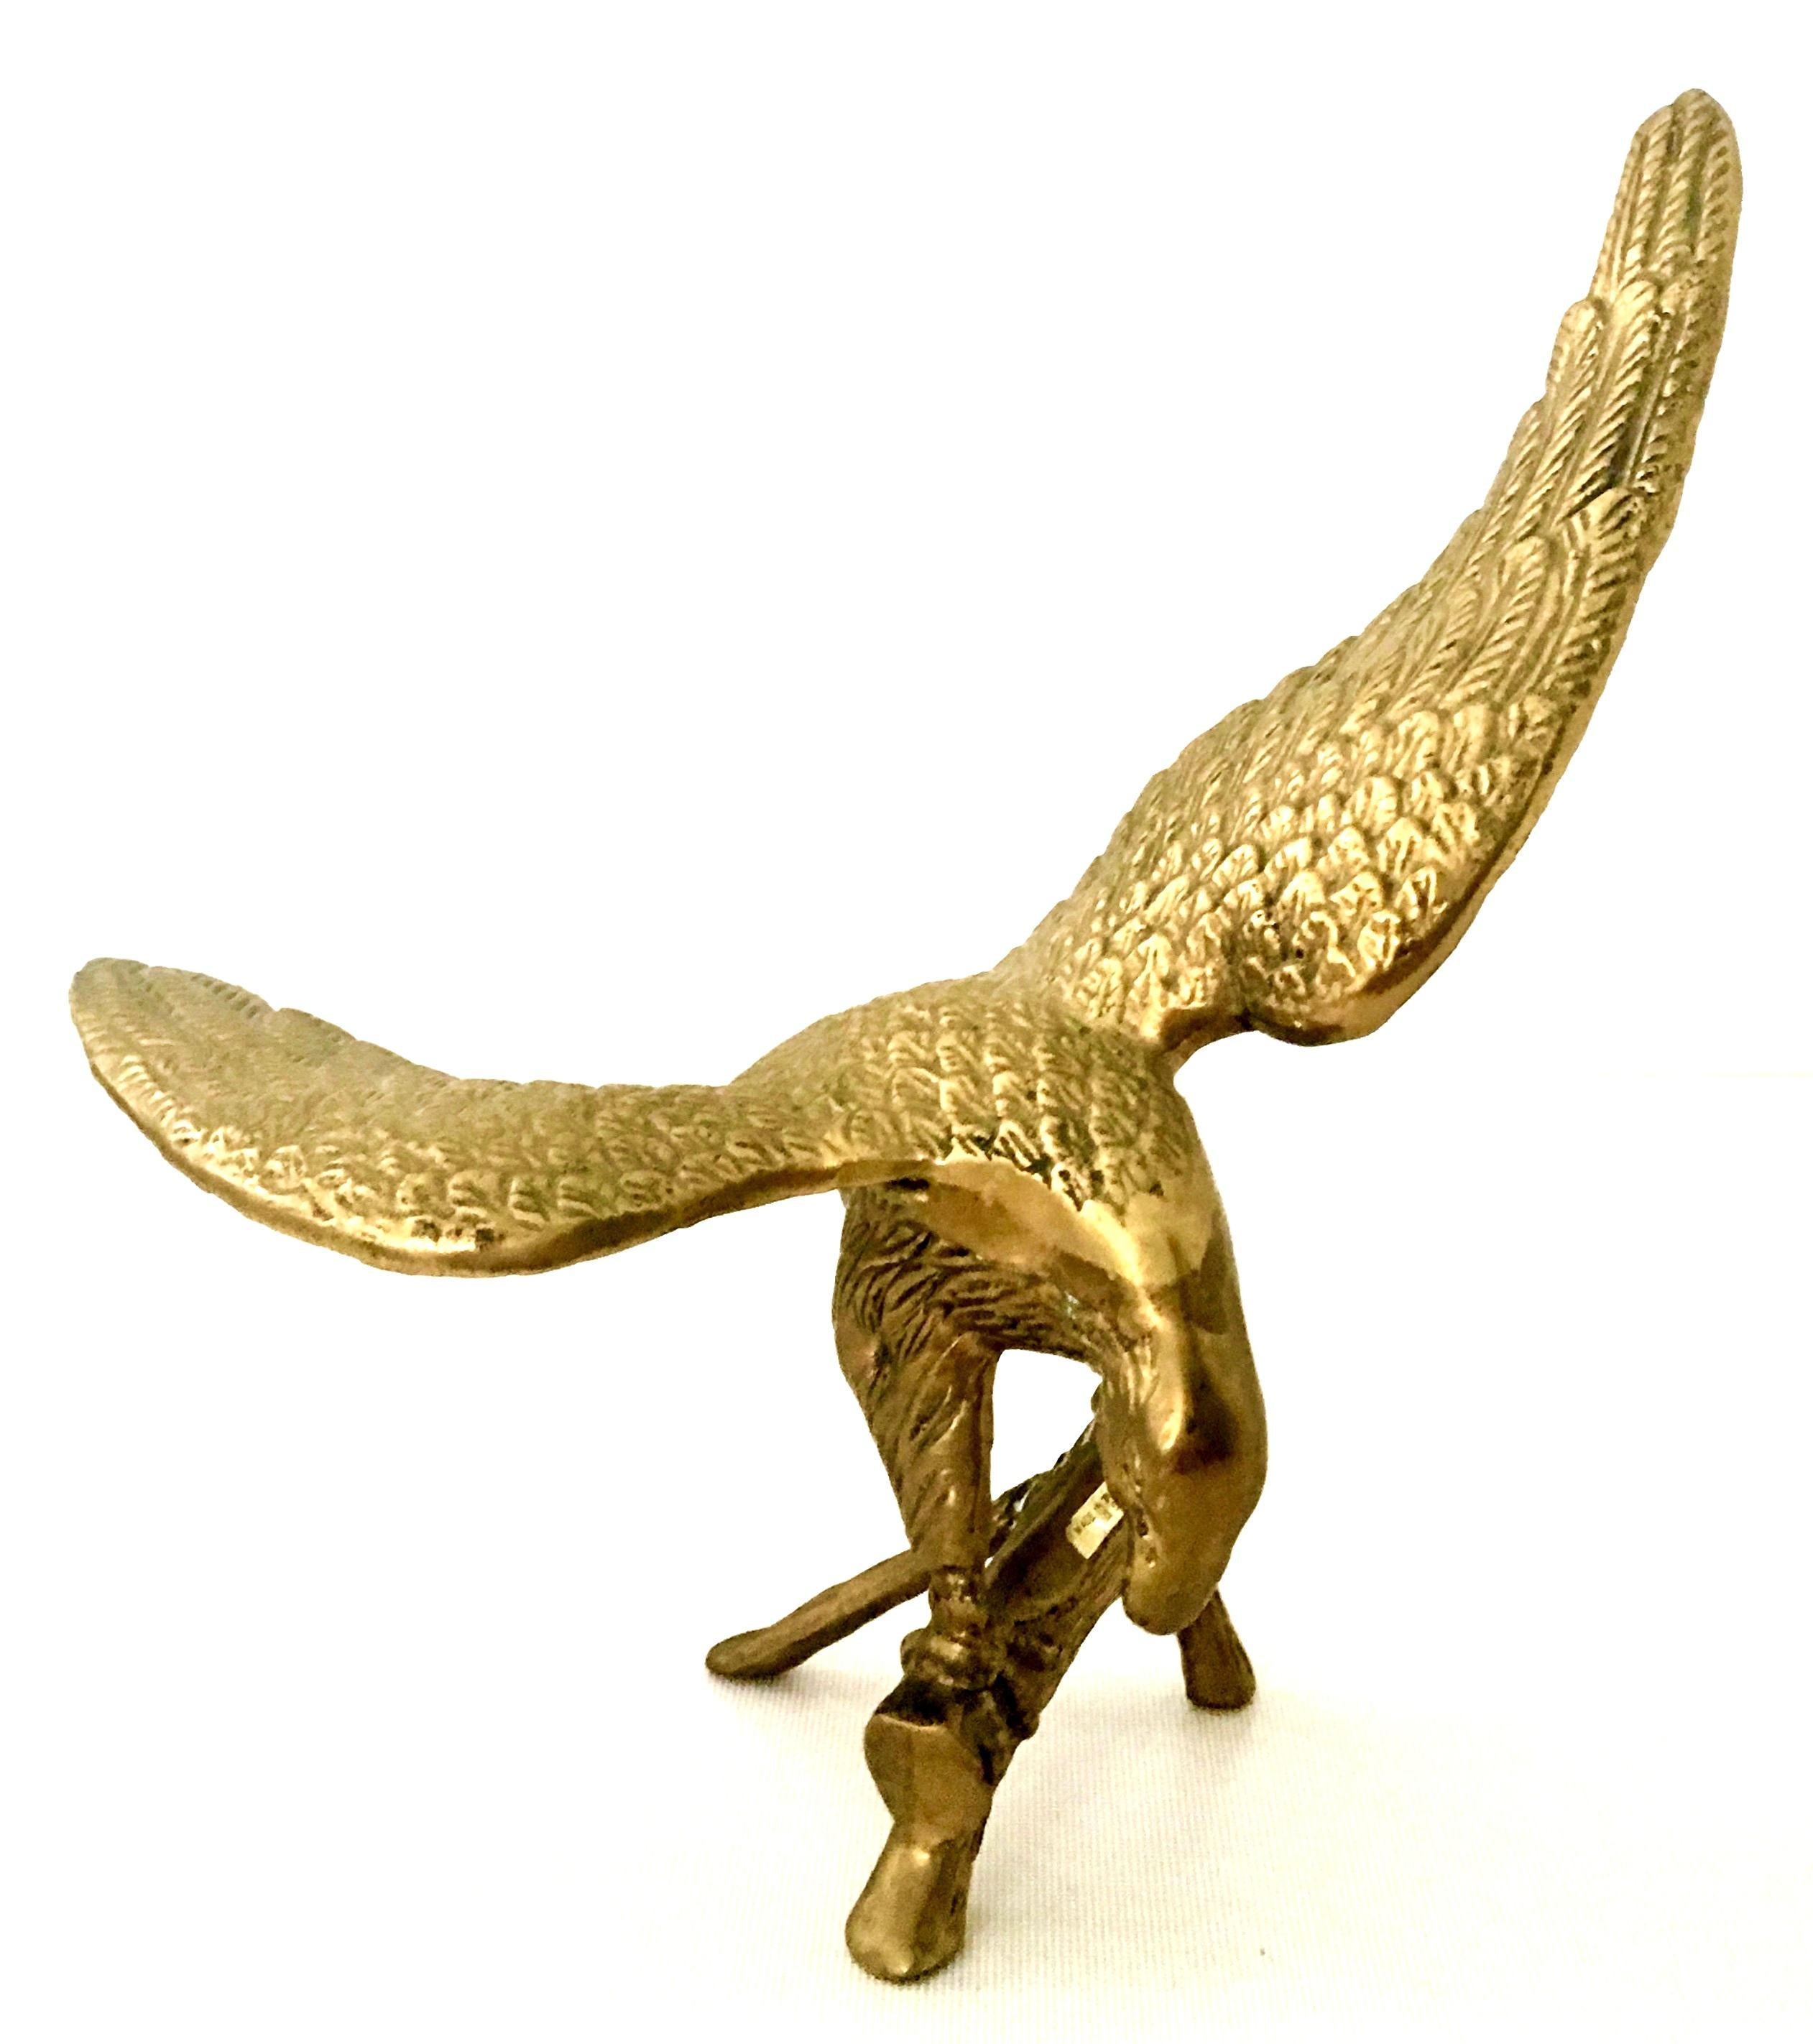 20th century polished solid brass perched eagle sculpture. Features a finely crafted and expertly detailed eagle about to take flight perched on a faux bois tree branch.
  